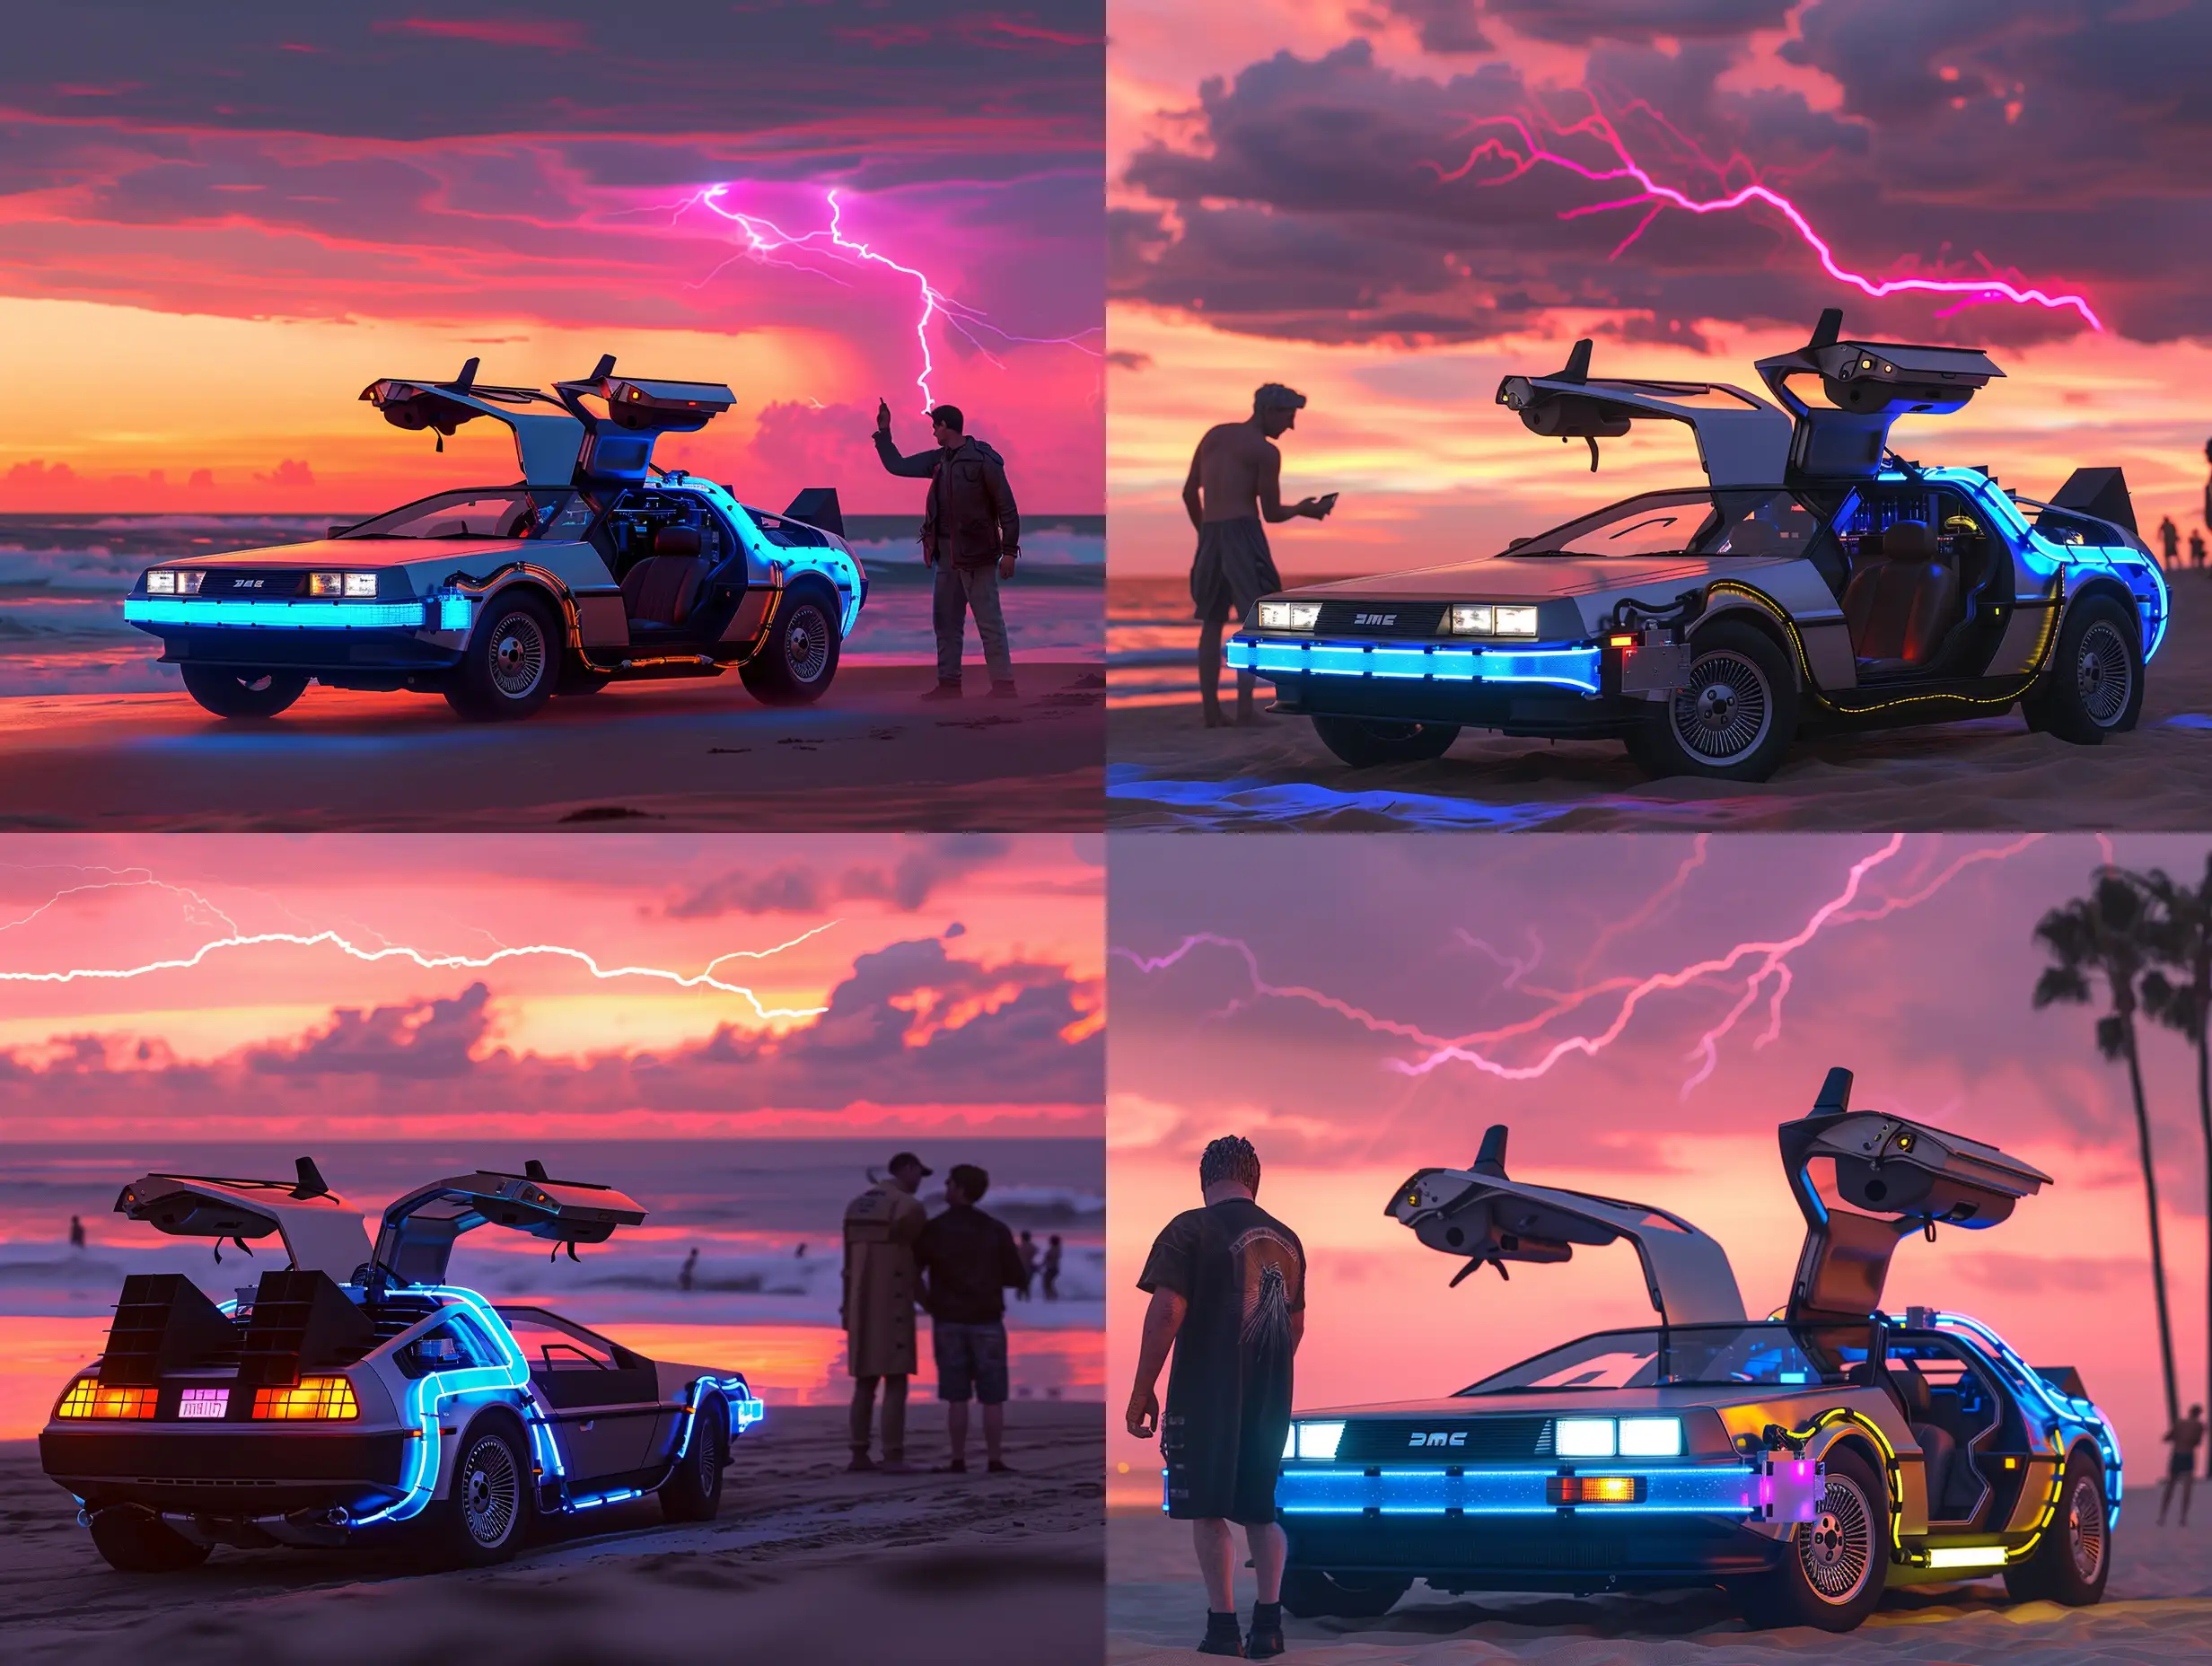 Marty-Mcfly-and-Doc-Brown-in-Back-to-the-Future-Delorean-at-Sunset-Beach